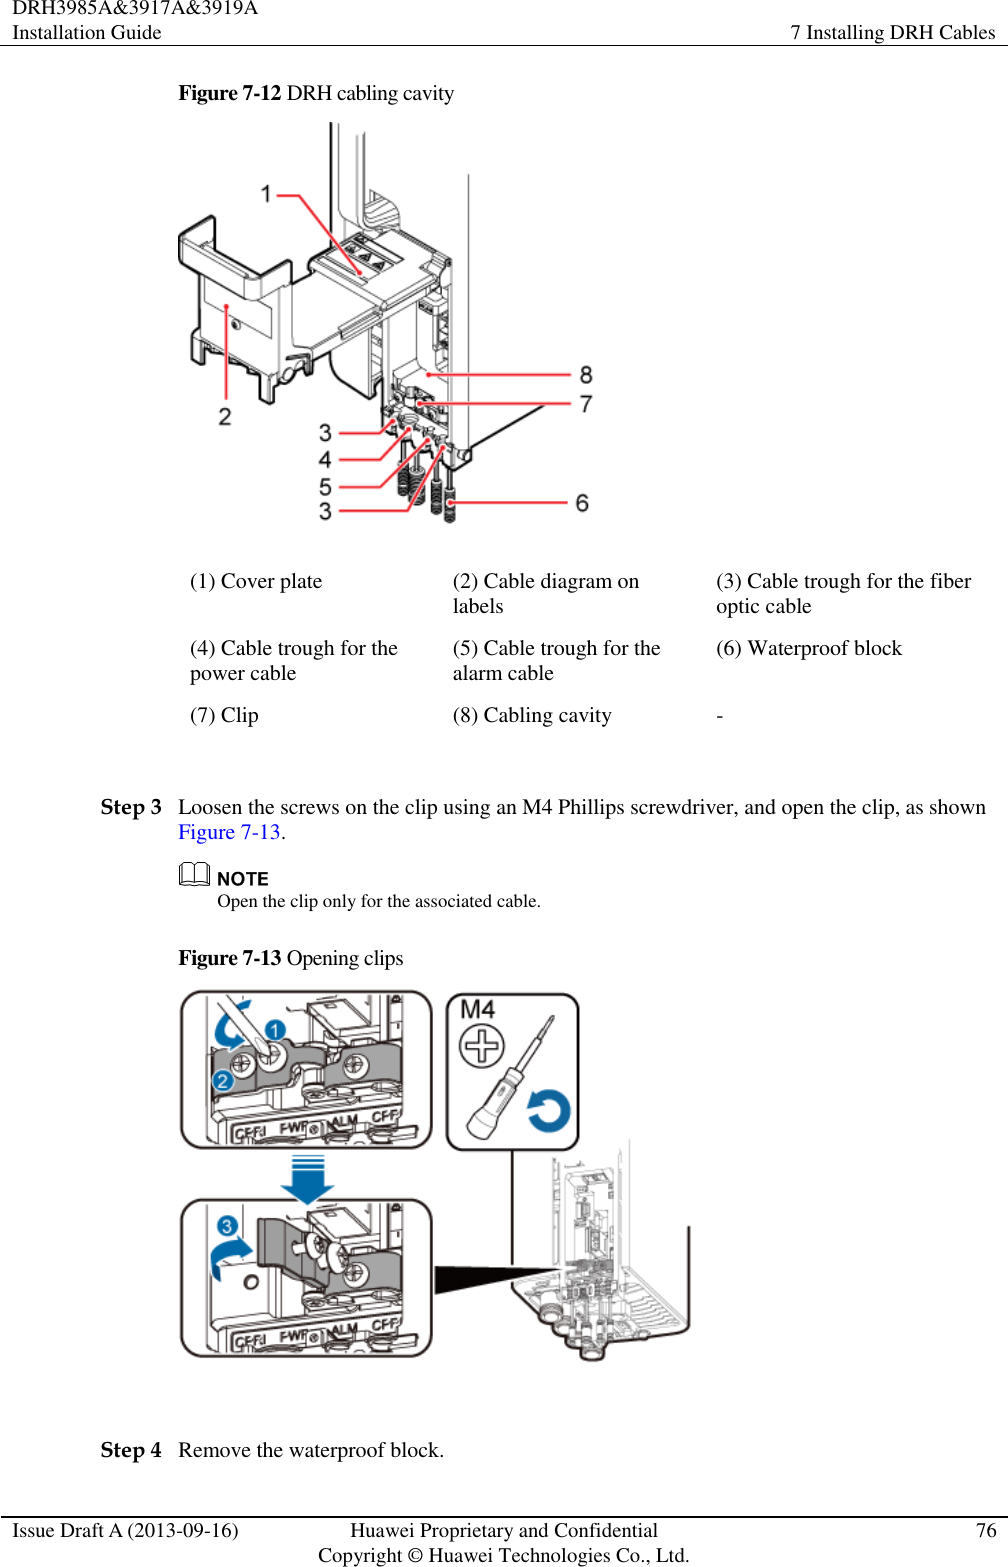 DRH3985A&amp;3917A&amp;3919A Installation Guide 7 Installing DRH Cables  Issue Draft A (2013-09-16) Huawei Proprietary and Confidential                                     Copyright © Huawei Technologies Co., Ltd. 76  Figure 7-12 DRH cabling cavity    (1) Cover plate (2) Cable diagram on labels (3) Cable trough for the fiber optic cable (4) Cable trough for the power cable (5) Cable trough for the alarm cable (6) Waterproof block (7) Clip (8) Cabling cavity -  Step 3 Loosen the screws on the clip using an M4 Phillips screwdriver, and open the clip, as shown Figure 7-13.  Open the clip only for the associated cable. Figure 7-13 Opening clips   Step 4 Remove the waterproof block. 